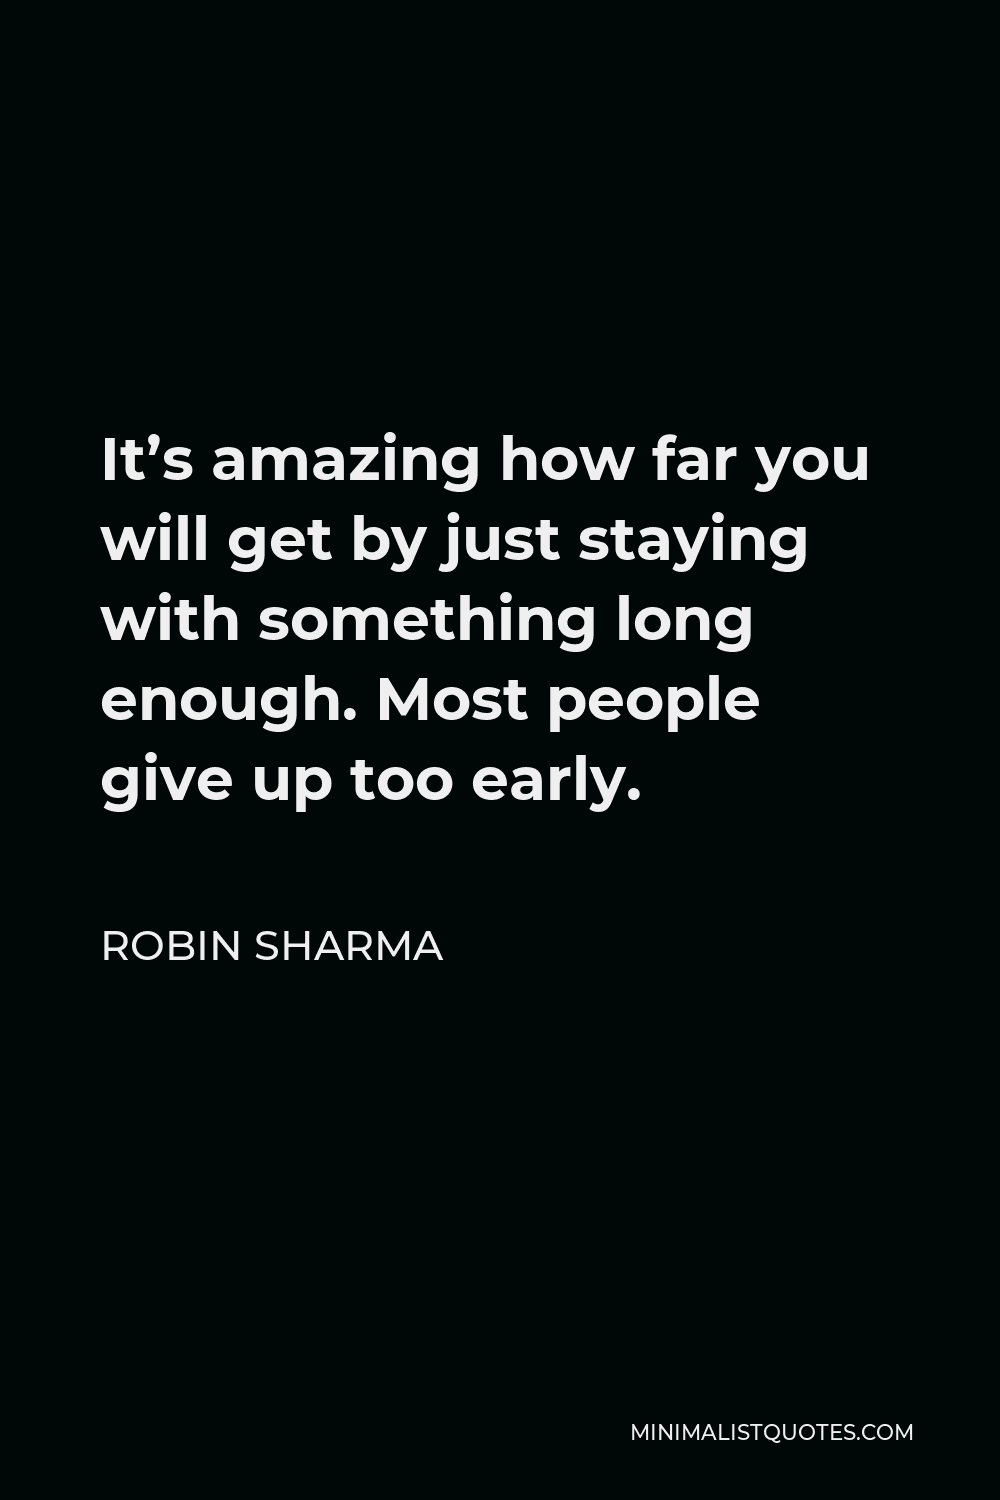 Robin Sharma Quote - It’s amazing how far you will get by just staying with something long enough. Most people give up too early.